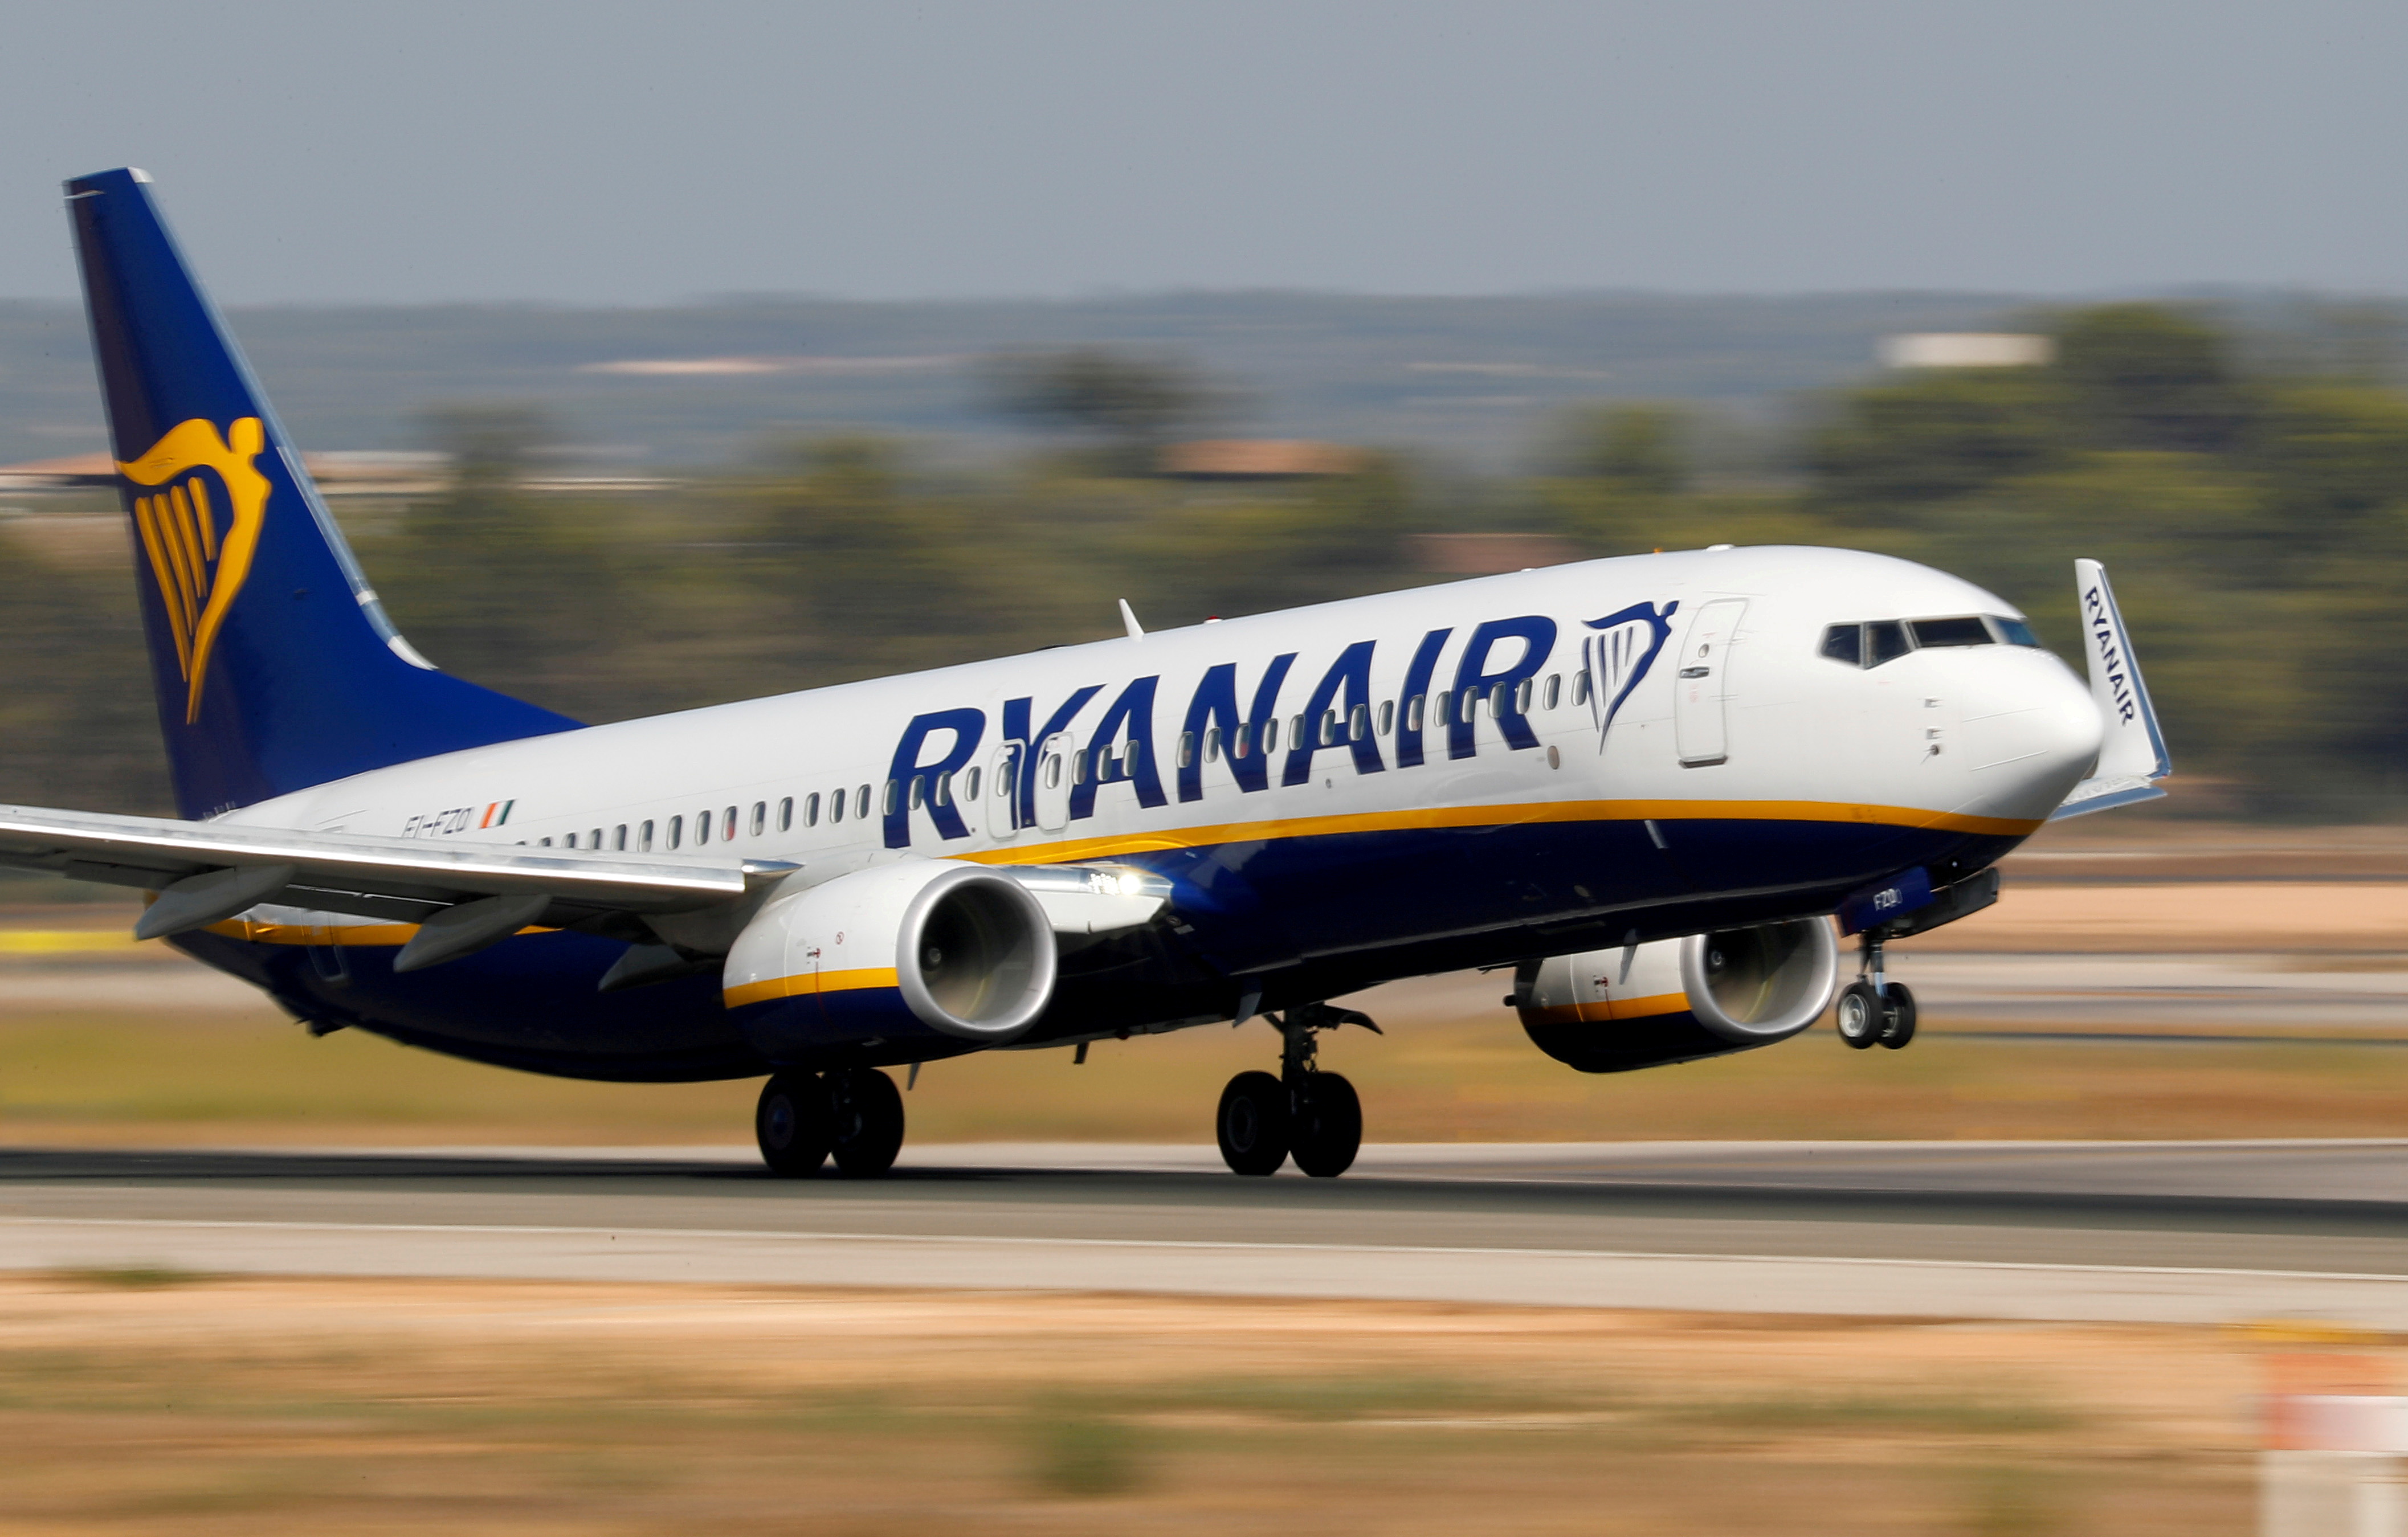 A Ryanair Boeing 737-800 airplane takes off from the airport in Palma de Mallorca, Spain, July 29, 2018.  REUTERS/Paul Hanna/File Photo